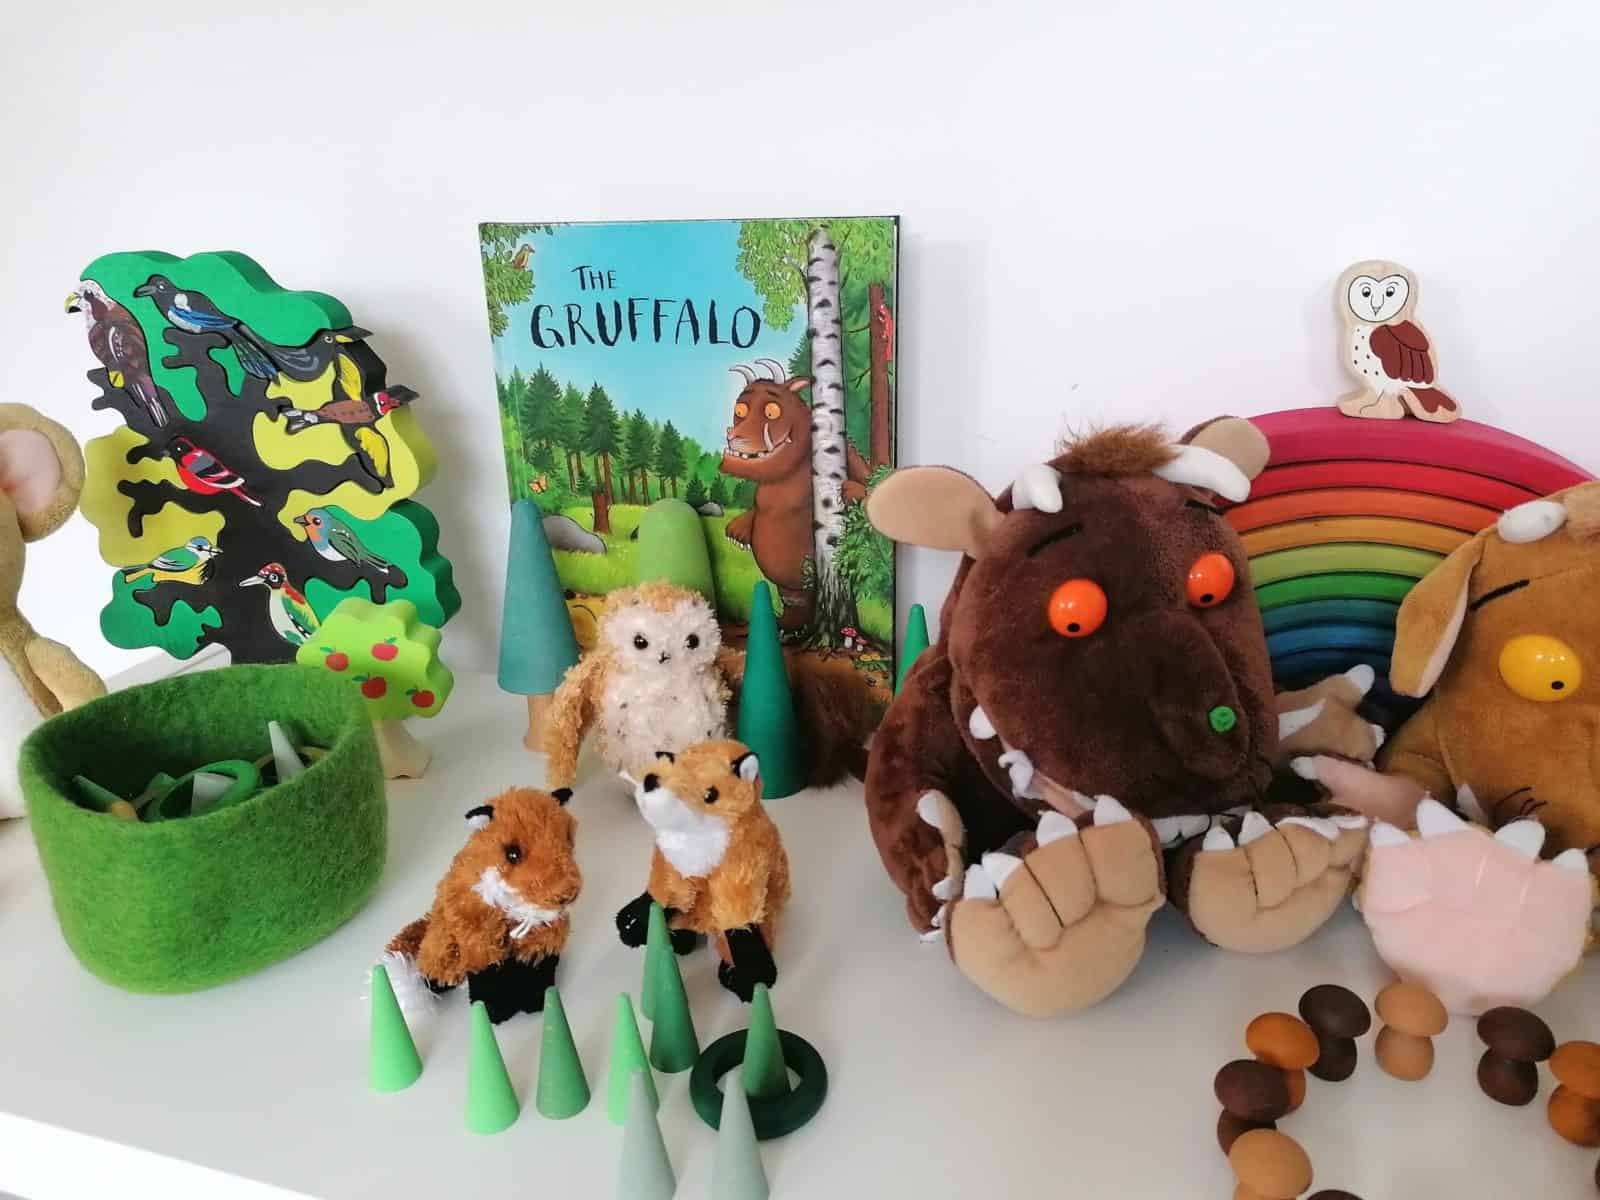 Gruffalo woodland top toys toy, shelf rotation. Small world play, story sacks and bookish play ideas.Toy orgnaisation and ideas for gifts.